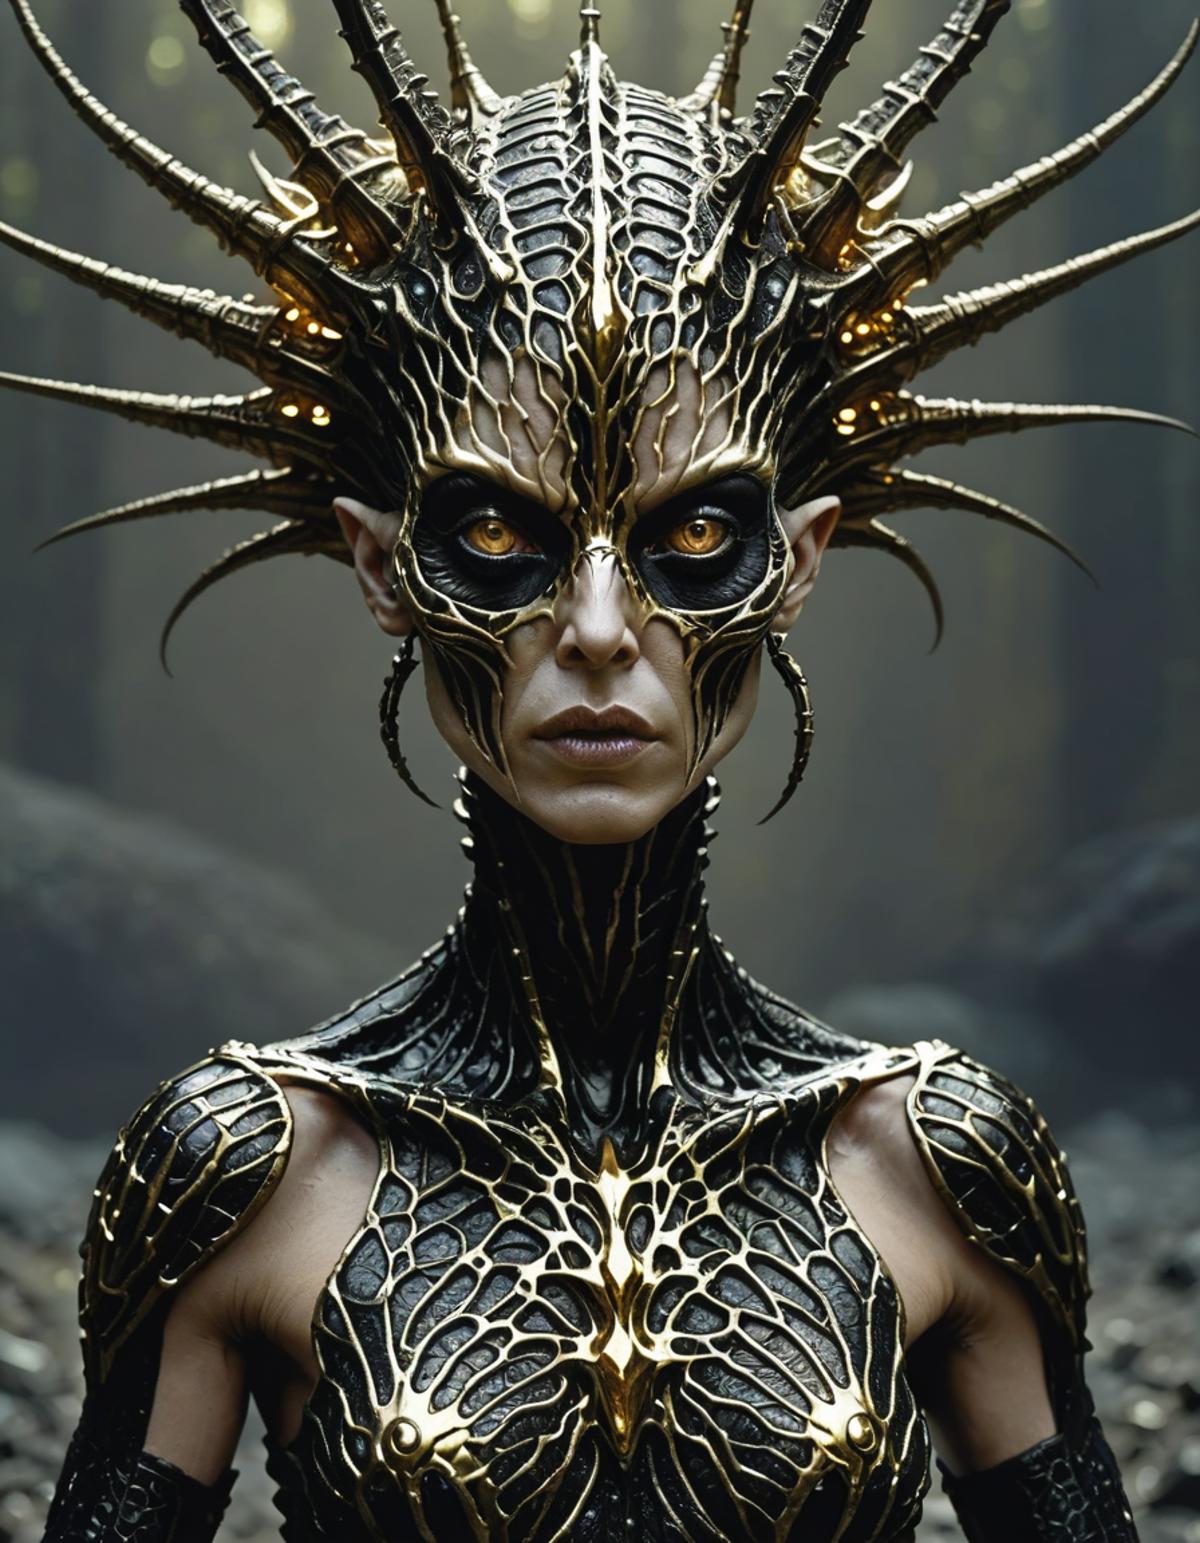 A close-up of a woman with gold and black makeup on her face and intricate snake-like designs on her head.